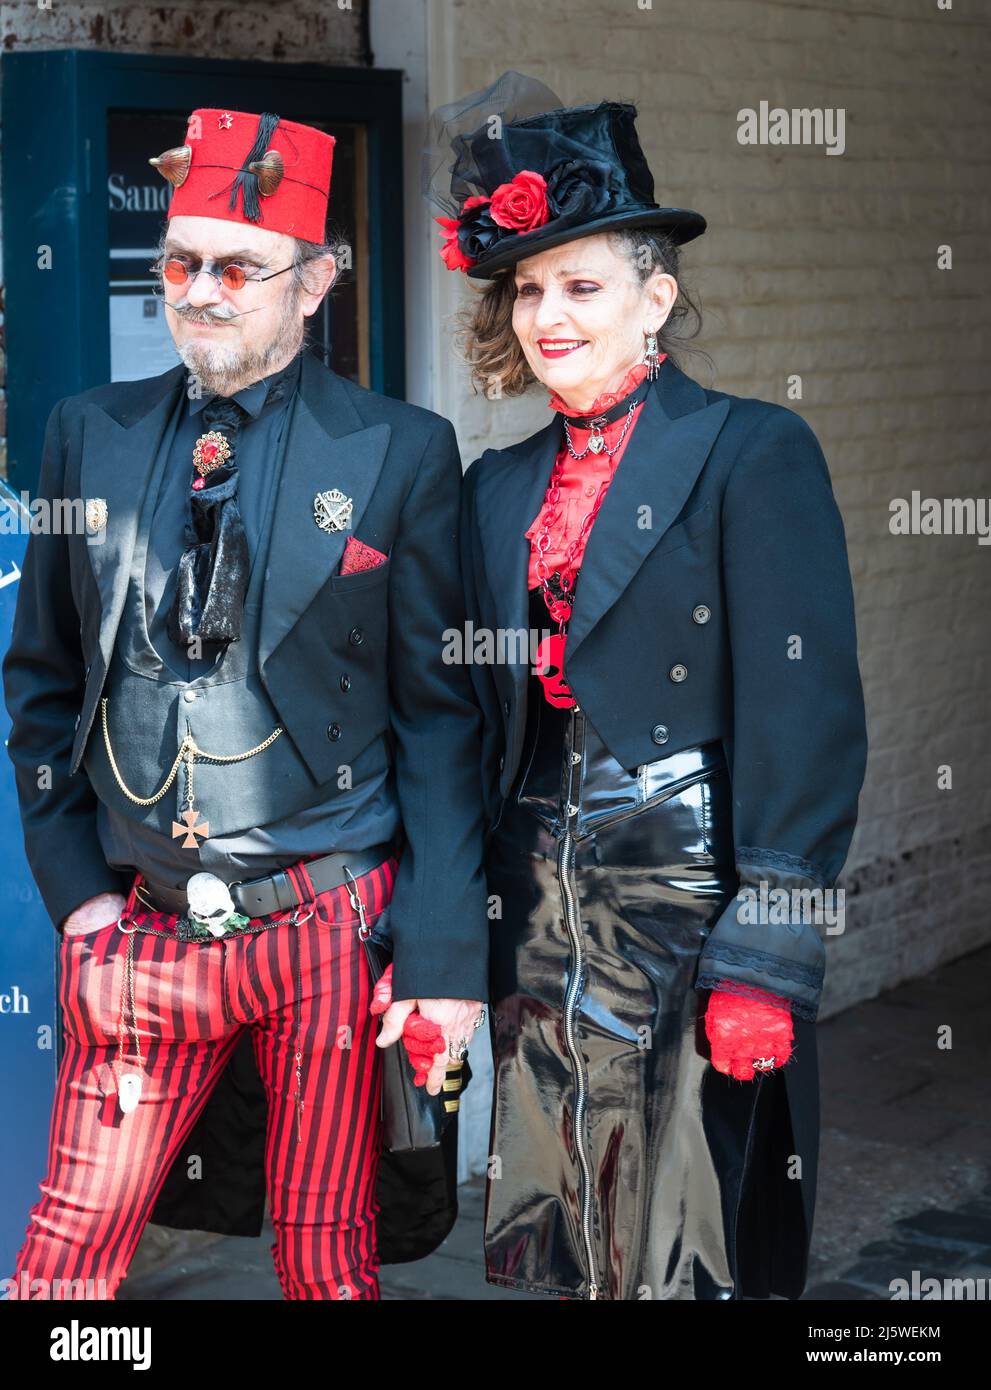 People dressed up at Whitby Goth Festival Stock Photo